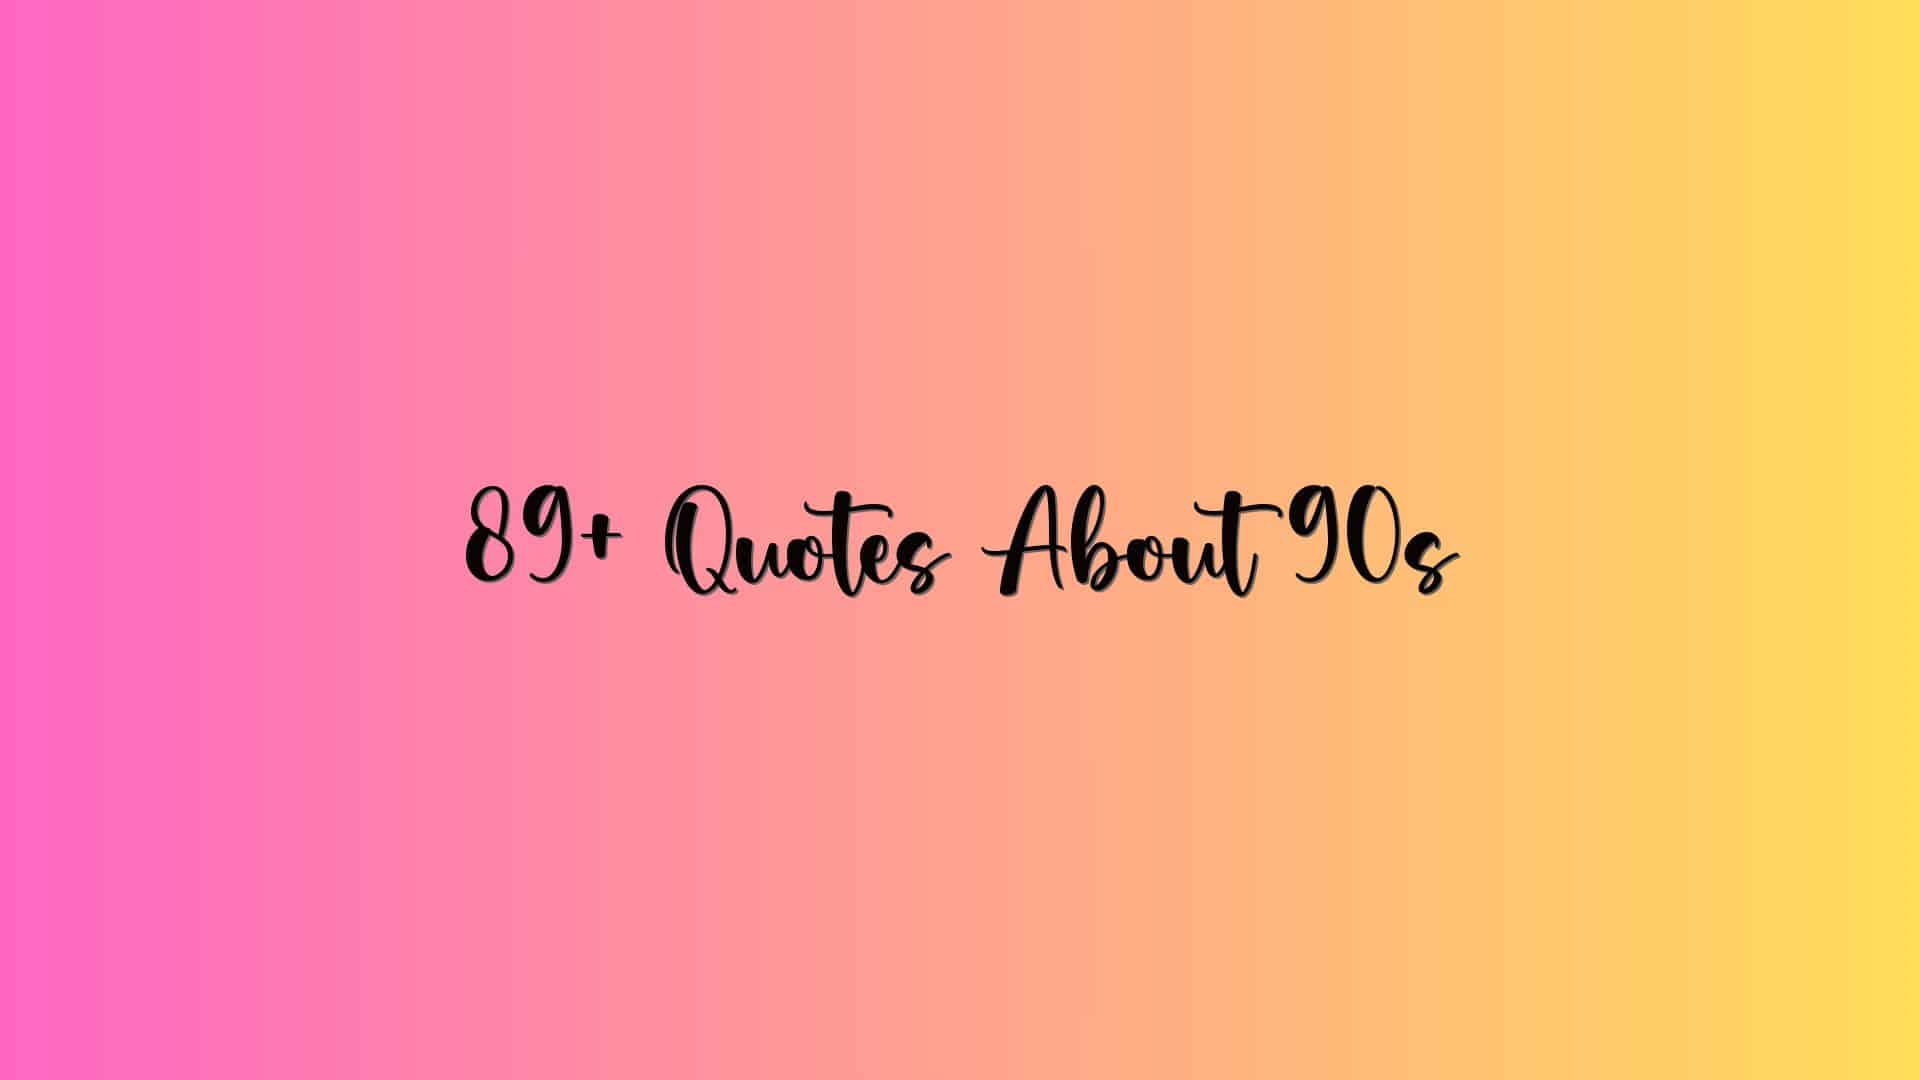 89+ Quotes About 90s